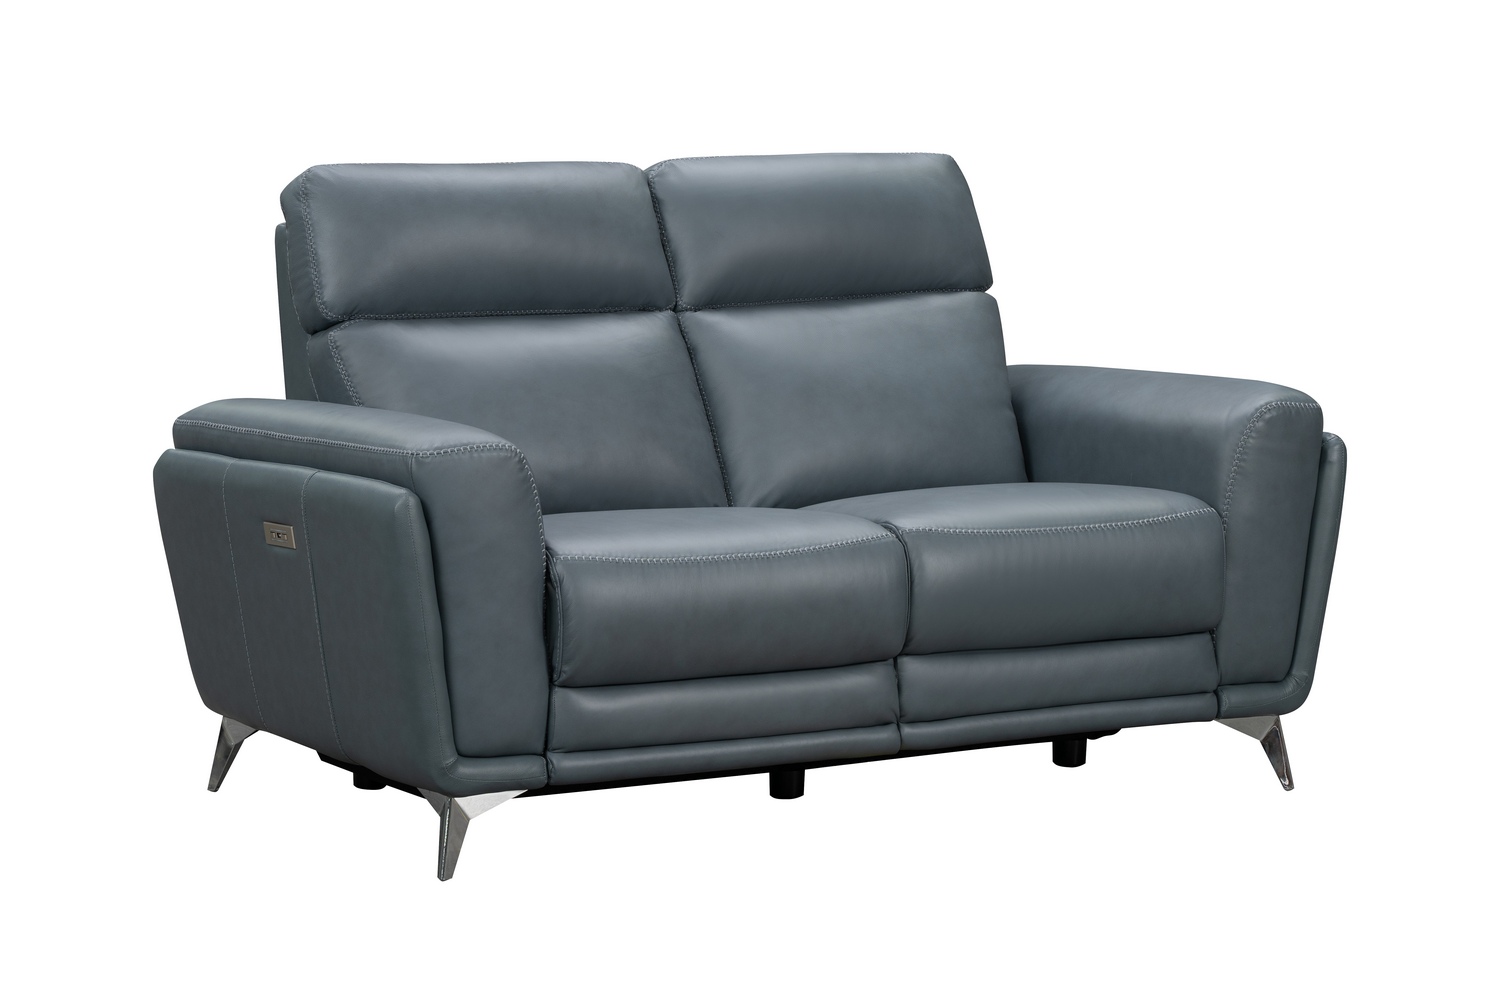 Barcalounger Cameron Power Reclining Loveseat with Power Head Rests - Masen Bluegray/Leather Match